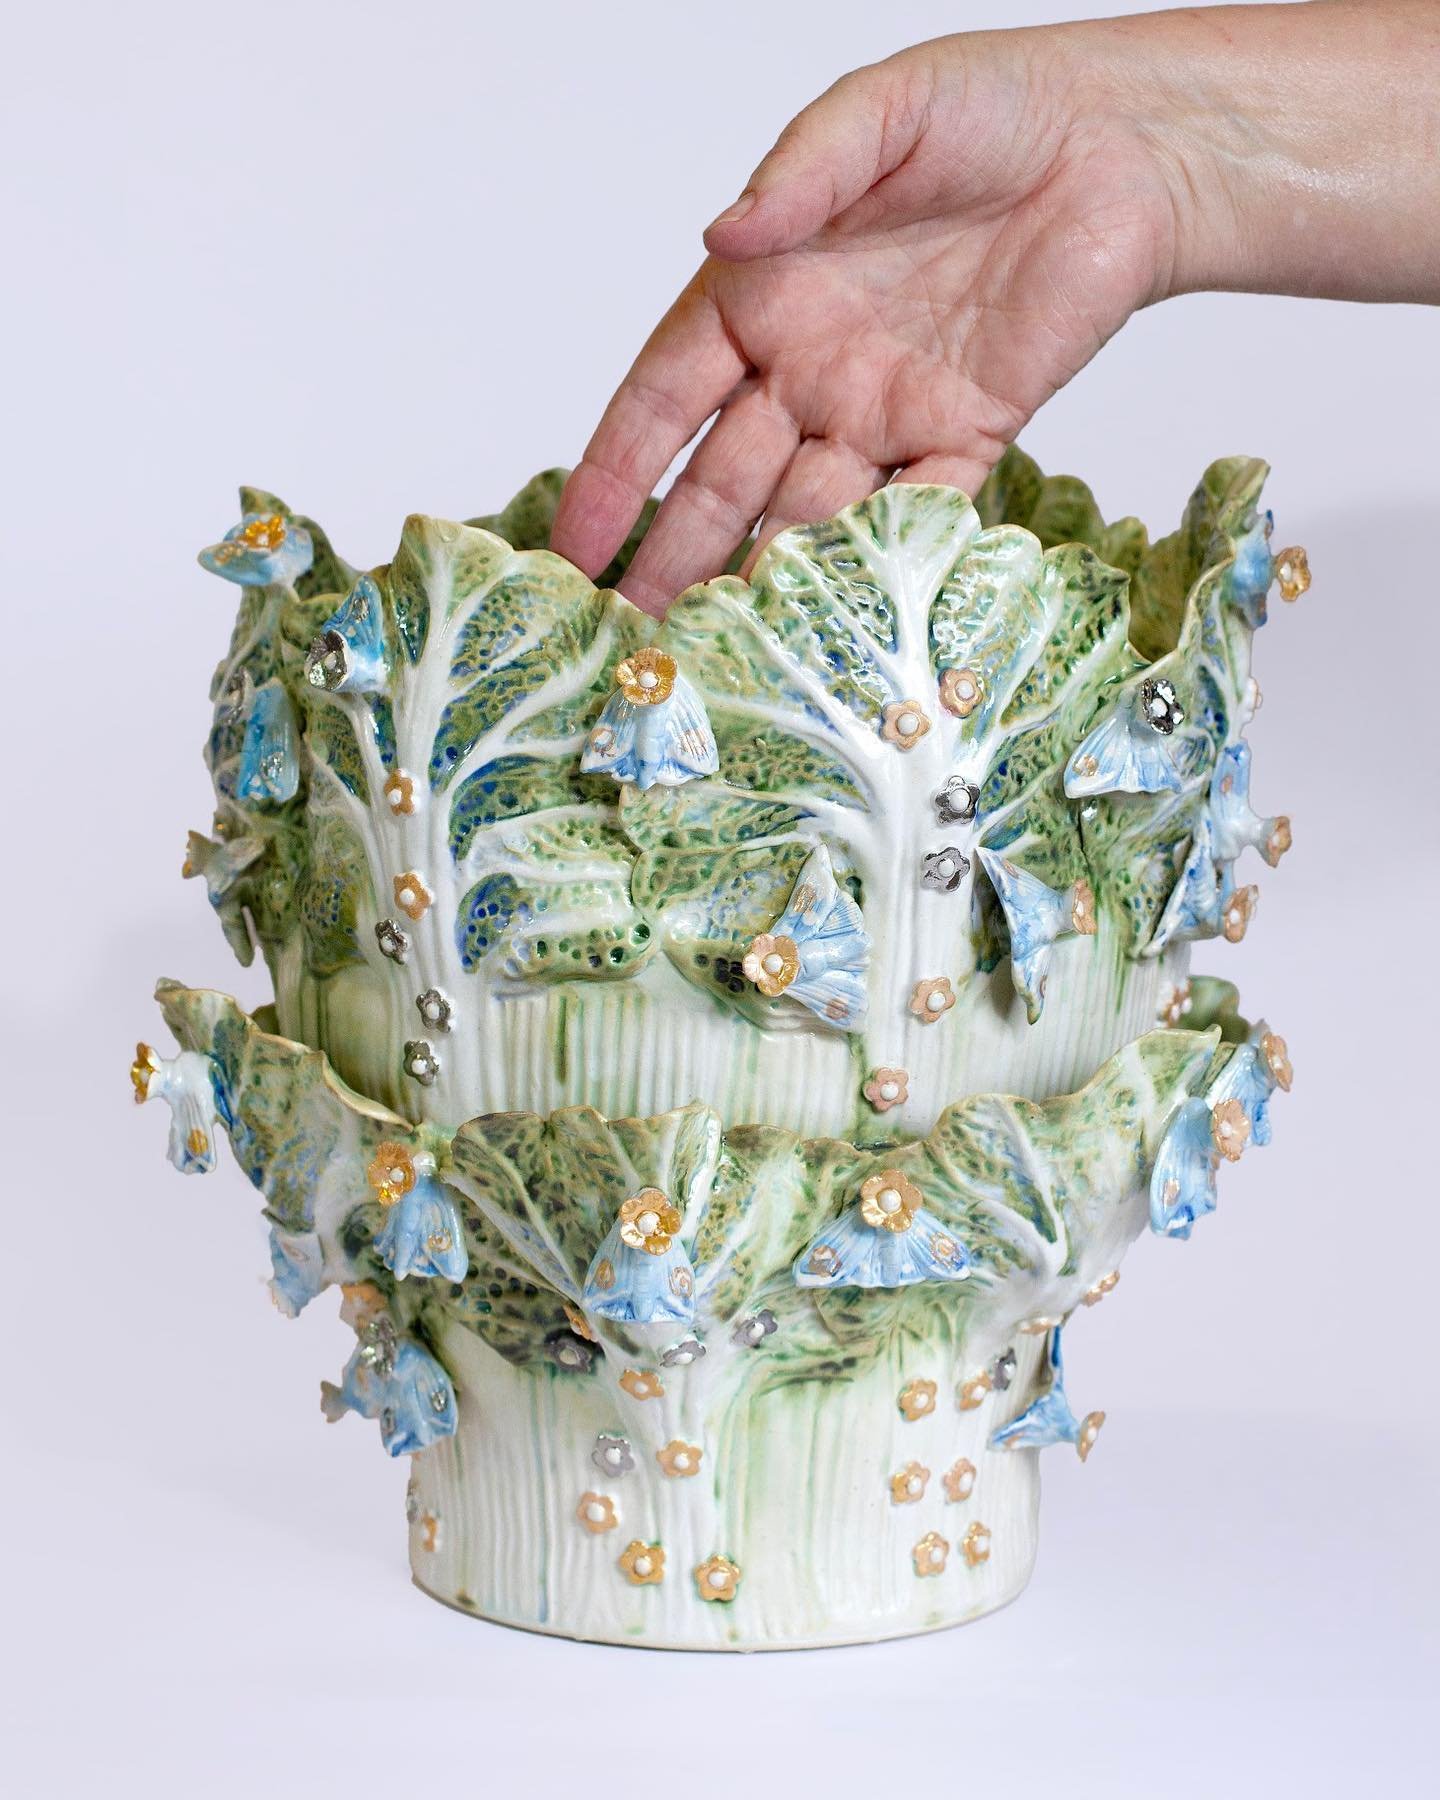 Cabbage vase with moths and flowers.
Stoneware with 22ka gold and platinum lusters